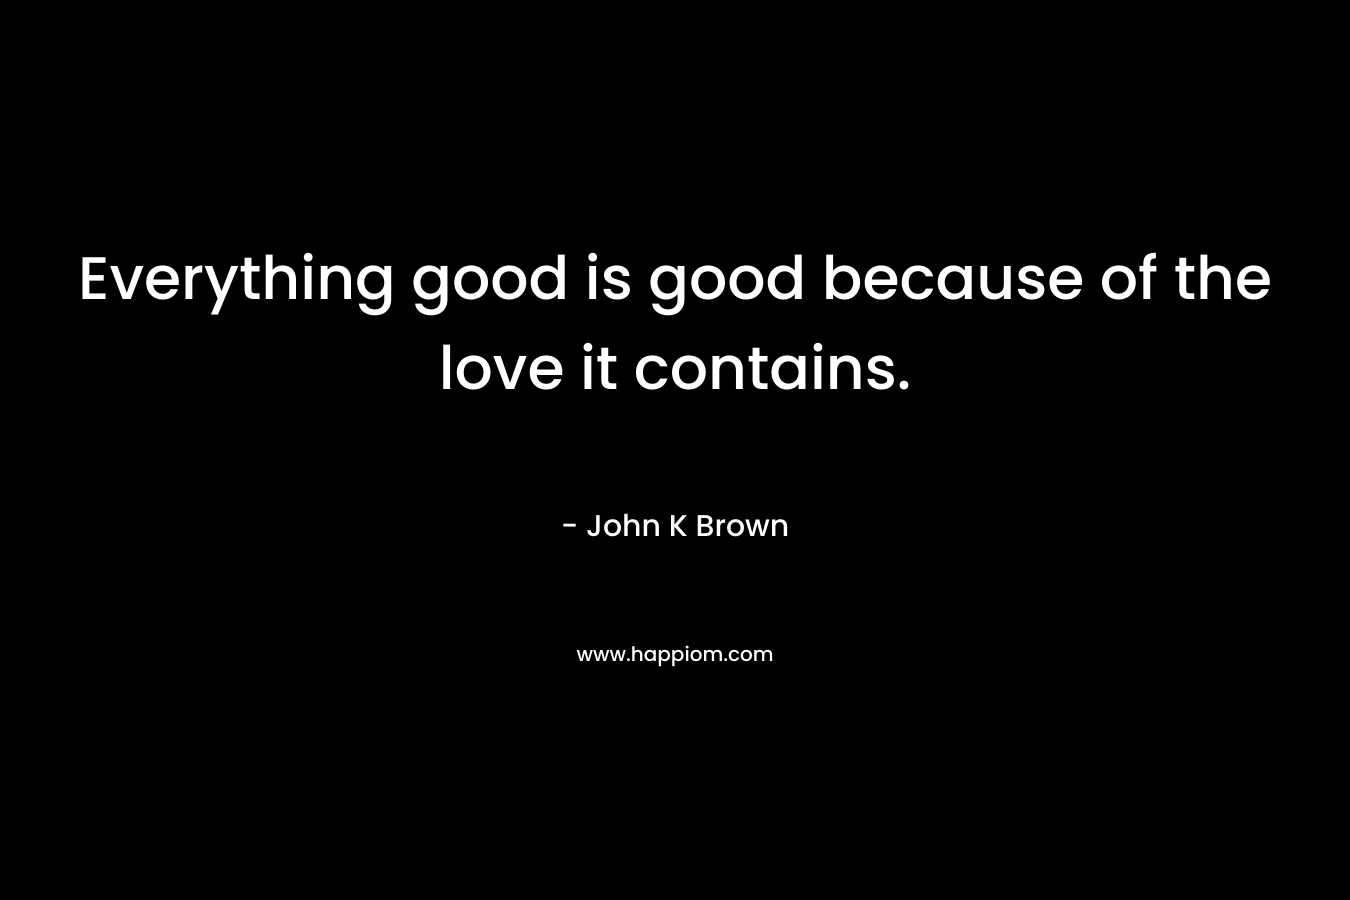 Everything good is good because of the love it contains.